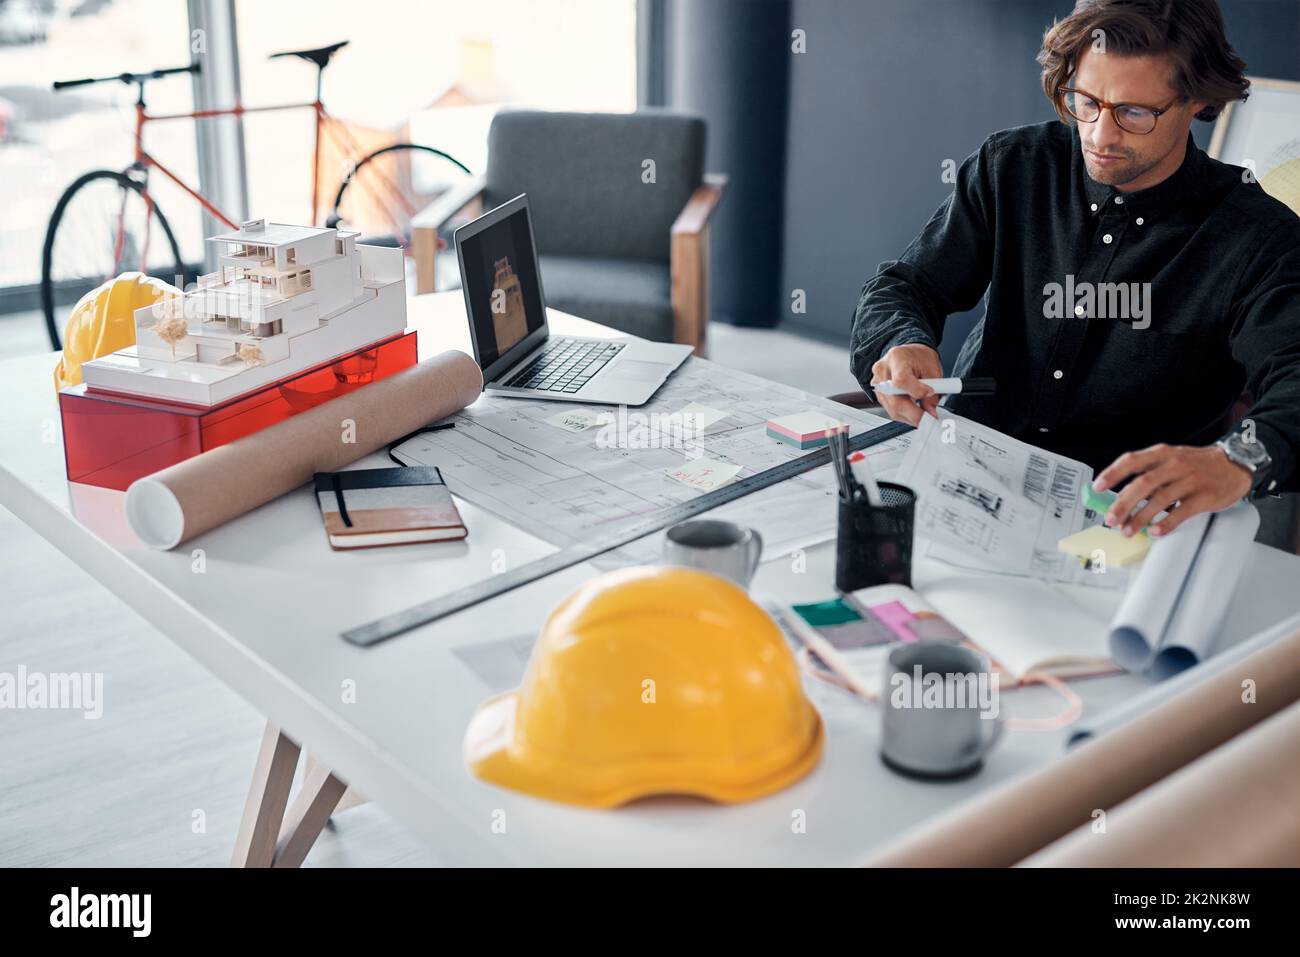 Proper planning saves you precious time, especially in this profession. Shot of a handsome young architect working on building plans and designs in his office. Stock Photo